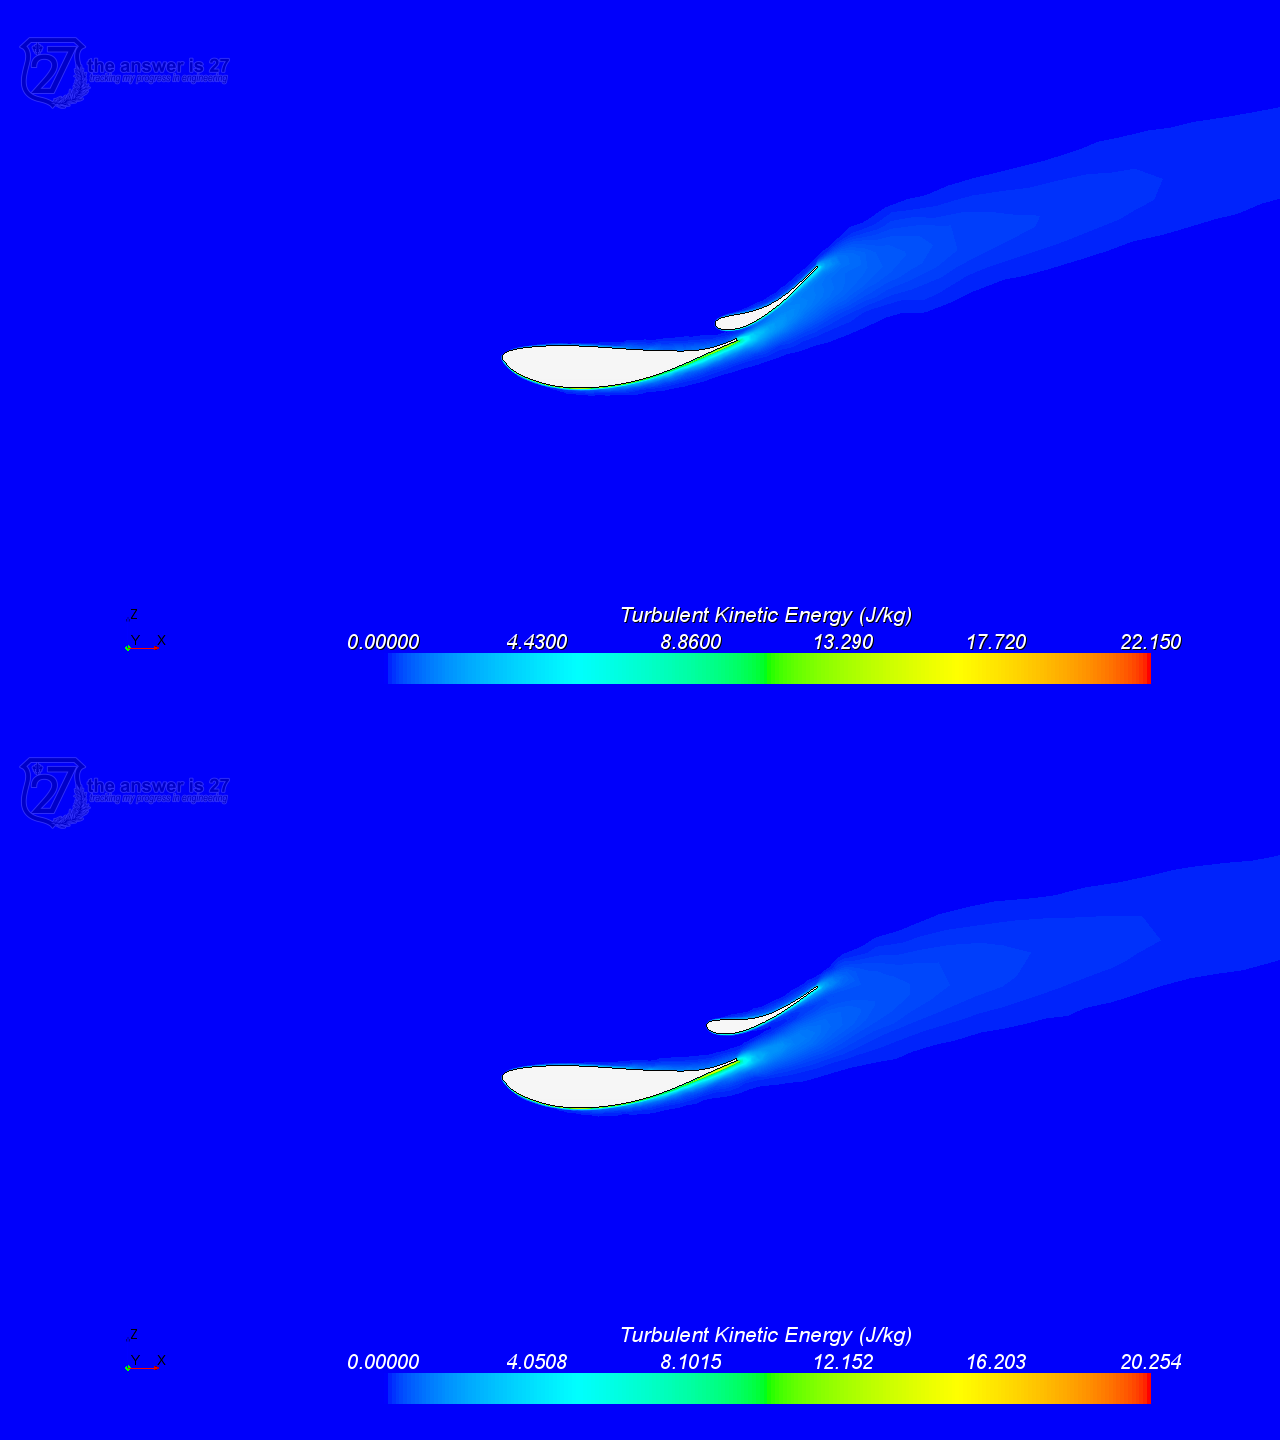 Figure 4. Turbulent kinetic energy at DRS OFF (above) and at flap pivoted 10 degrees (DRS ON, below).